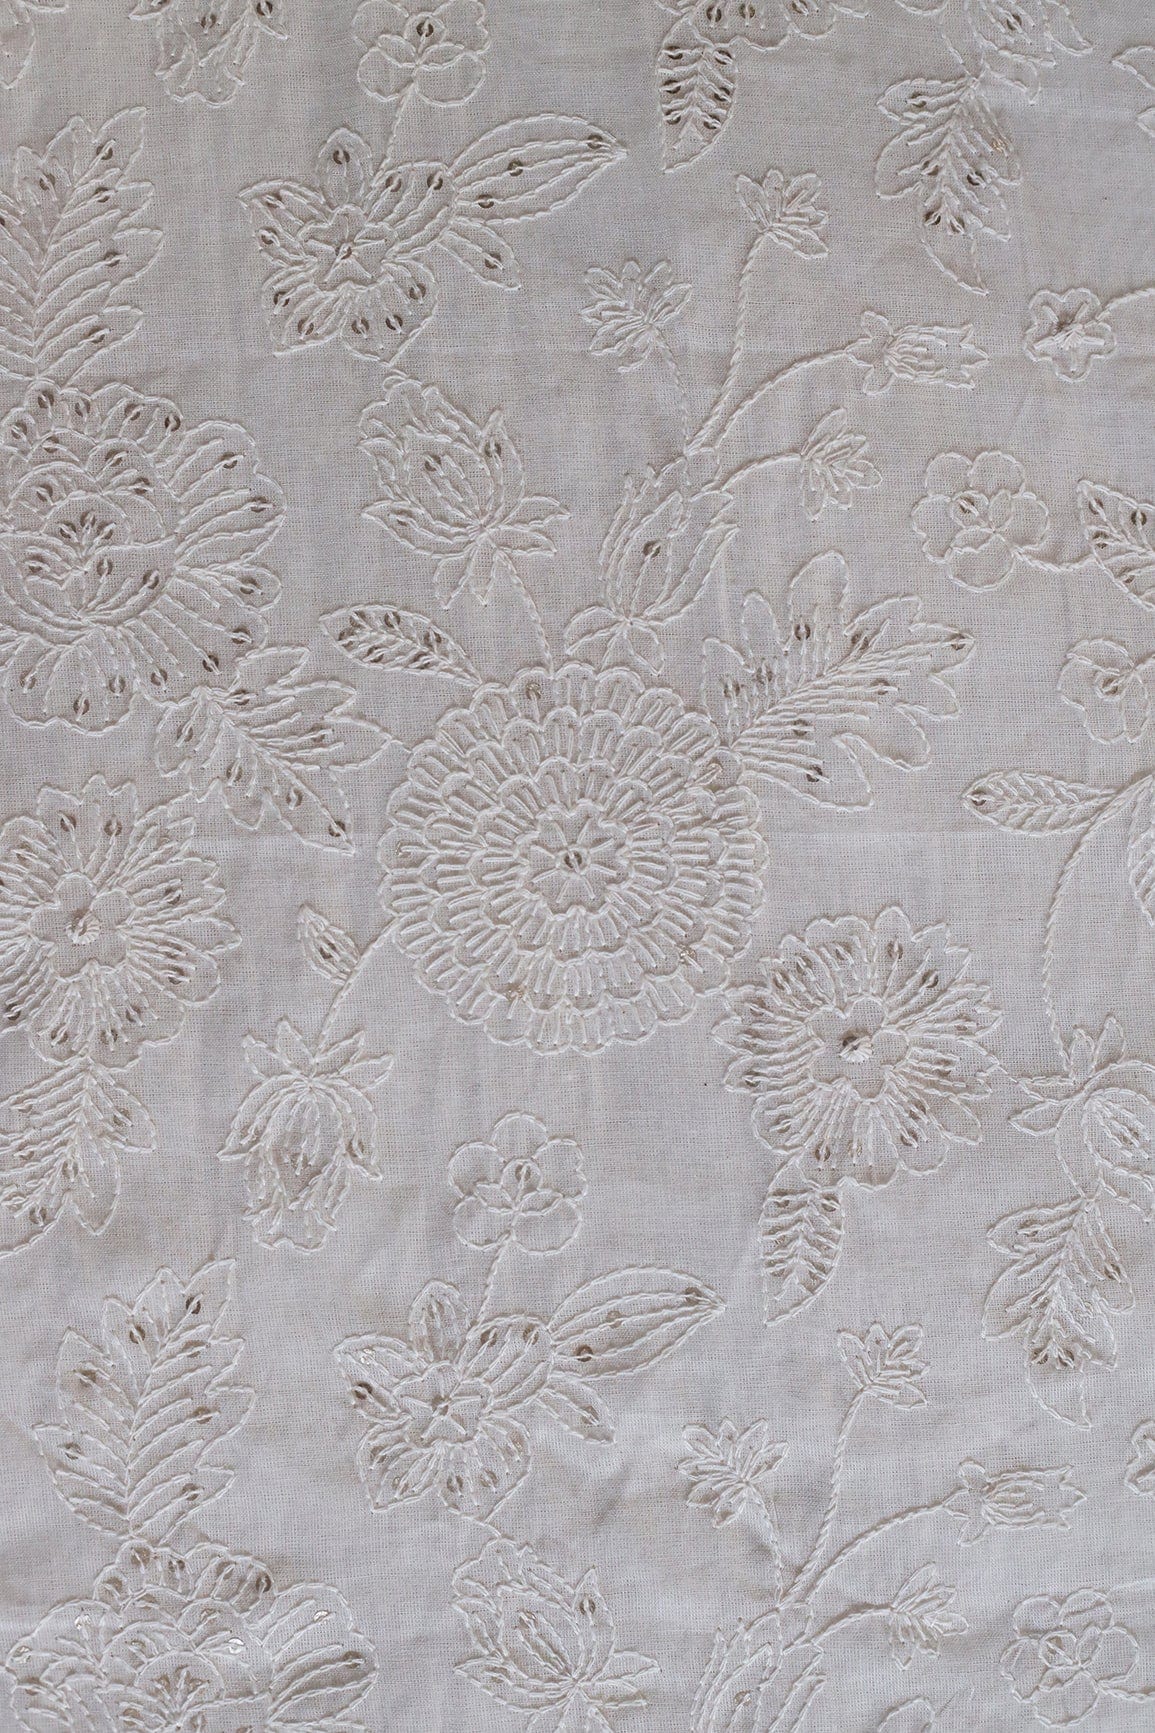 doeraa Embroidery Fabrics White Thread With Gold Sequins Heavy Floral Embroidery Work On White Cotton Fabric